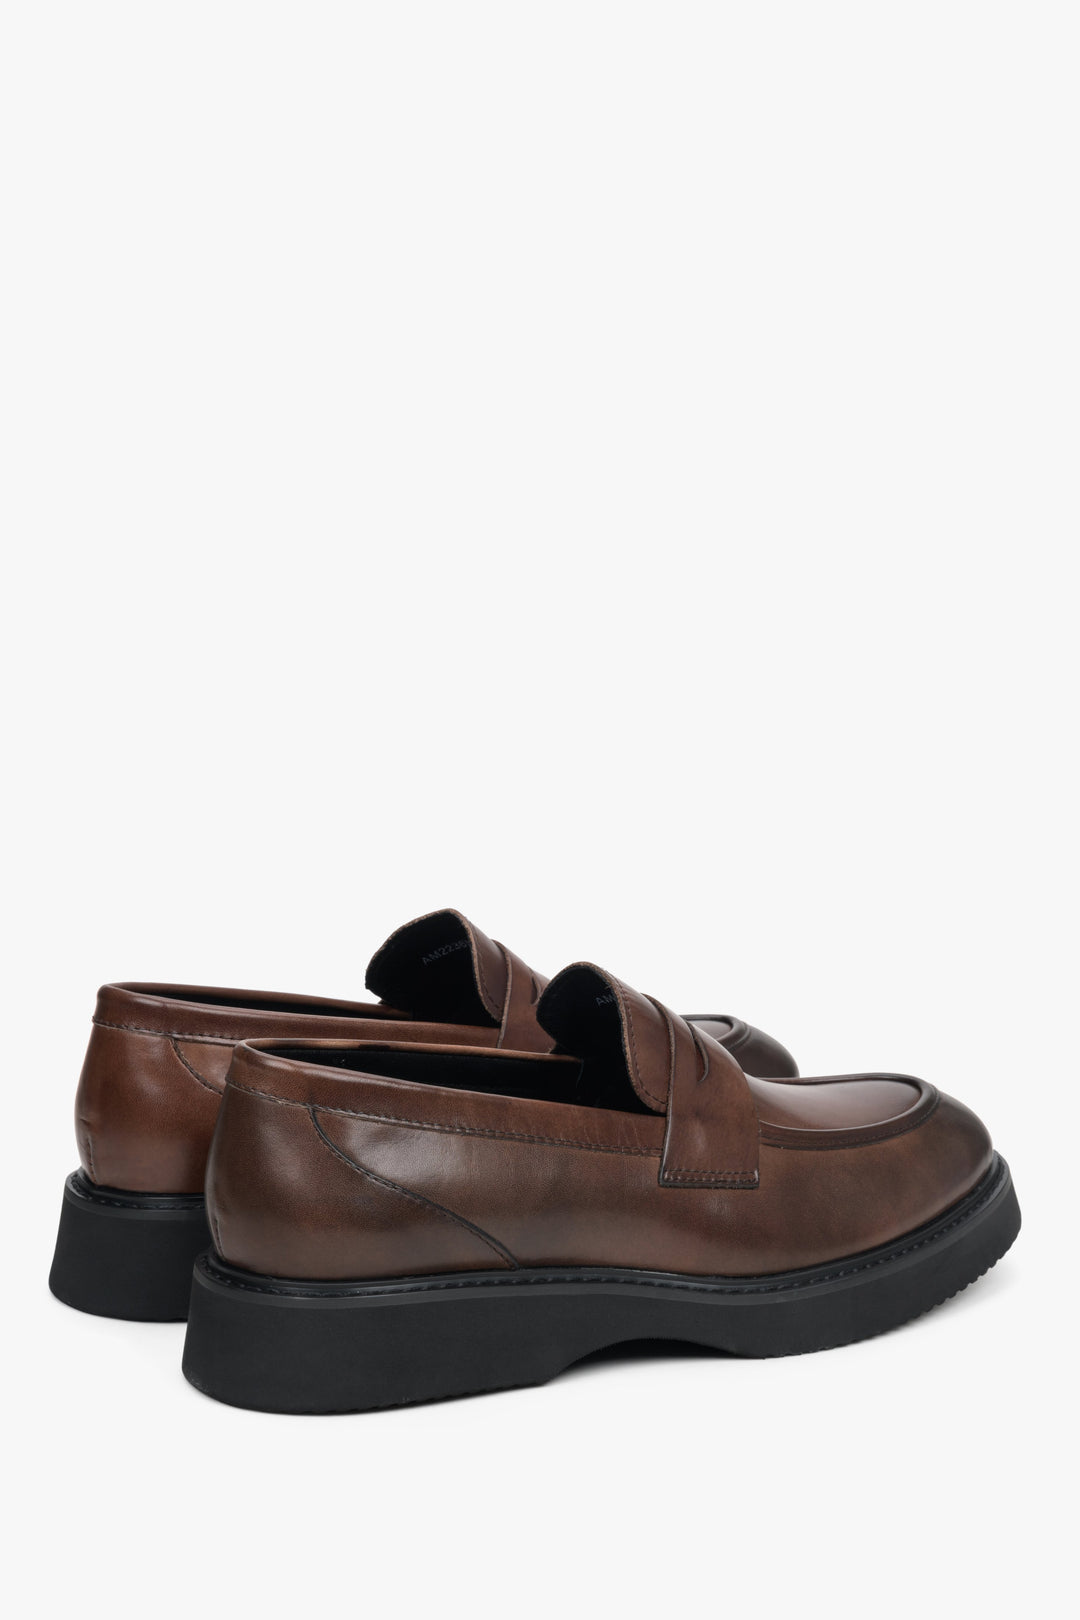 Men's dark brown leather Estro loafers - close-up on the heel and side line of the shoe.